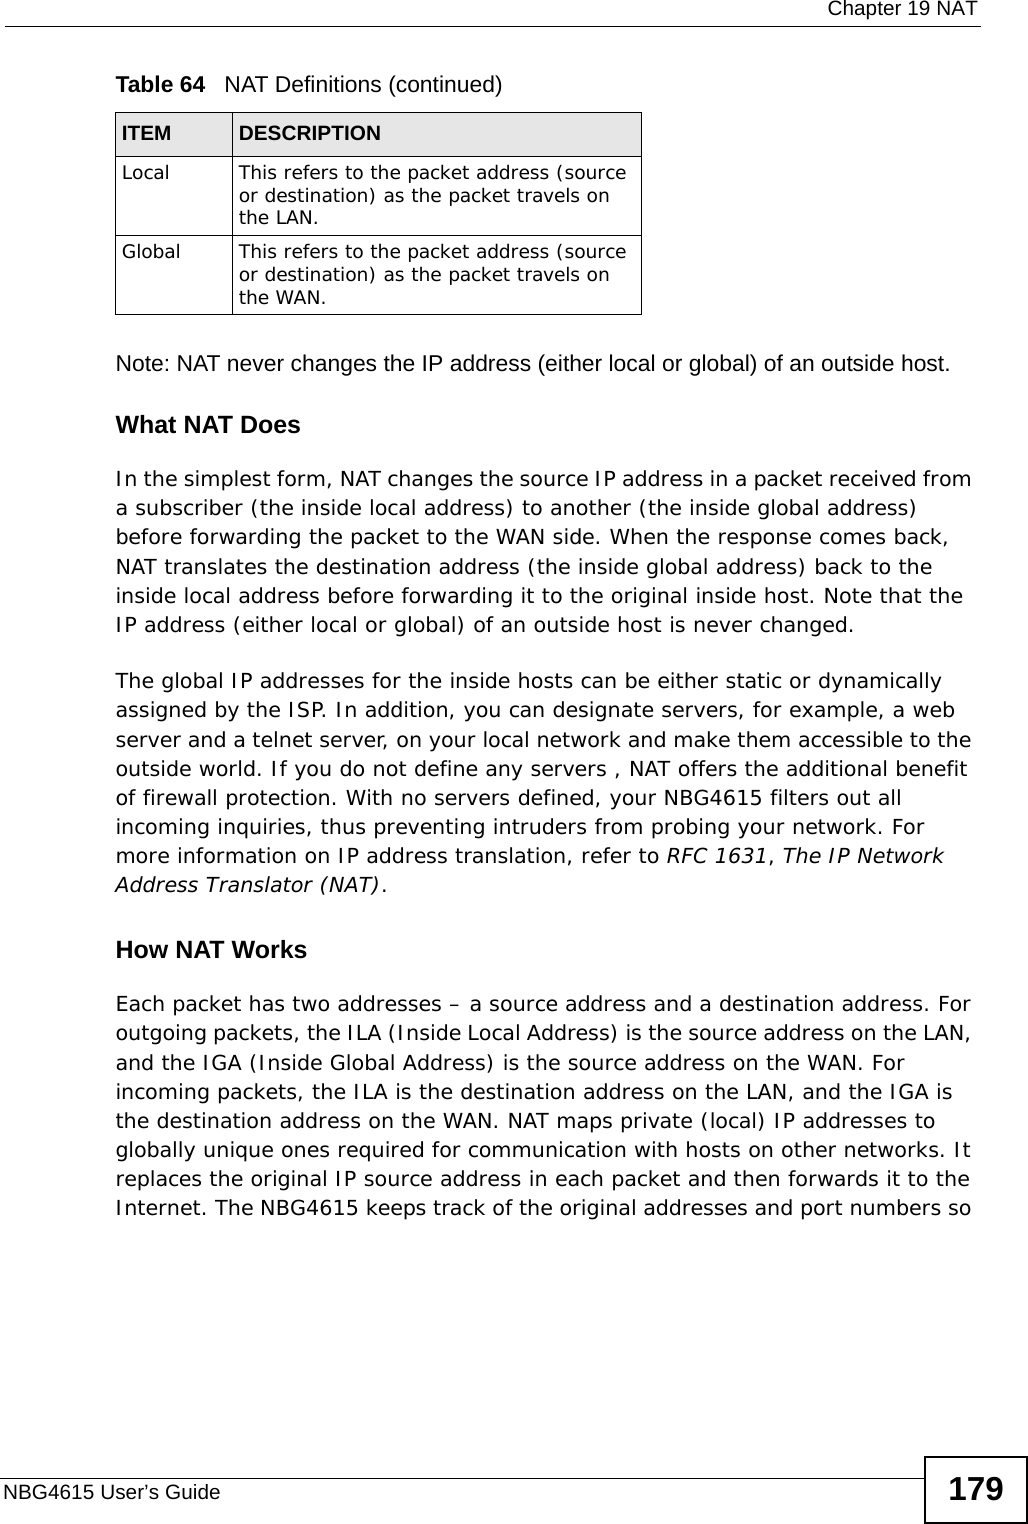  Chapter 19 NATNBG4615 User’s Guide 179Note: NAT never changes the IP address (either local or global) of an outside host.What NAT DoesIn the simplest form, NAT changes the source IP address in a packet received from a subscriber (the inside local address) to another (the inside global address) before forwarding the packet to the WAN side. When the response comes back, NAT translates the destination address (the inside global address) back to the inside local address before forwarding it to the original inside host. Note that the IP address (either local or global) of an outside host is never changed.The global IP addresses for the inside hosts can be either static or dynamically assigned by the ISP. In addition, you can designate servers, for example, a web server and a telnet server, on your local network and make them accessible to the outside world. If you do not define any servers , NAT offers the additional benefit of firewall protection. With no servers defined, your NBG4615 filters out all incoming inquiries, thus preventing intruders from probing your network. For more information on IP address translation, refer to RFC 1631, The IP Network Address Translator (NAT).How NAT WorksEach packet has two addresses – a source address and a destination address. For outgoing packets, the ILA (Inside Local Address) is the source address on the LAN, and the IGA (Inside Global Address) is the source address on the WAN. For incoming packets, the ILA is the destination address on the LAN, and the IGA is the destination address on the WAN. NAT maps private (local) IP addresses to globally unique ones required for communication with hosts on other networks. It replaces the original IP source address in each packet and then forwards it to the Internet. The NBG4615 keeps track of the original addresses and port numbers so Local This refers to the packet address (source or destination) as the packet travels on the LAN.Global This refers to the packet address (source or destination) as the packet travels on the WAN.Table 64   NAT Definitions (continued)ITEM DESCRIPTION